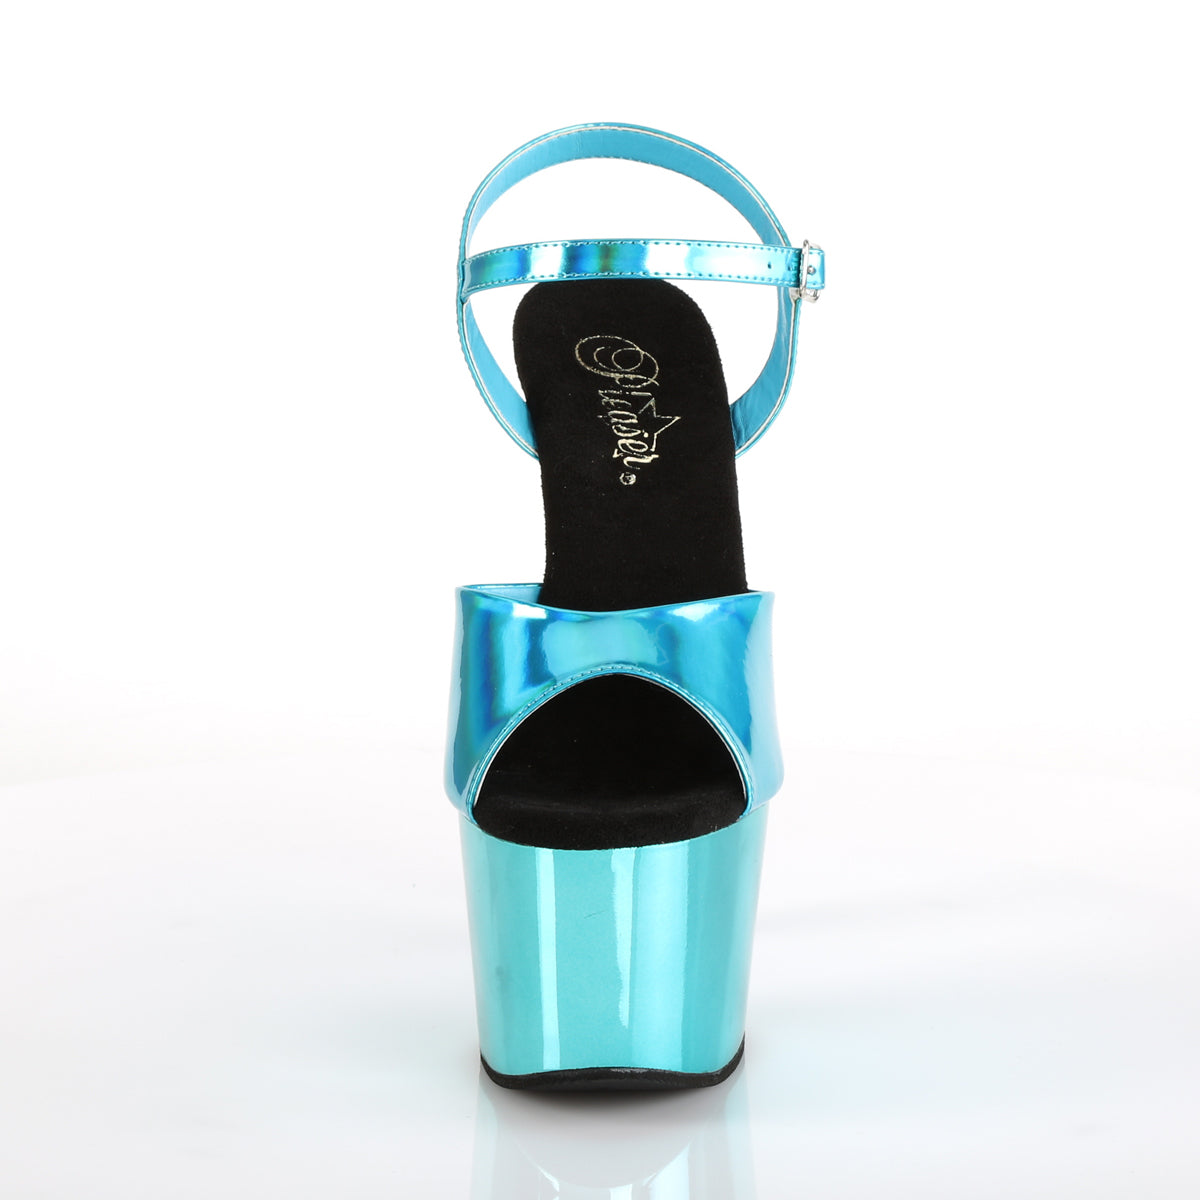 Pleaser Sandales pour femmes ADORE-709hgch hologramme turquoise / chrome turquoise